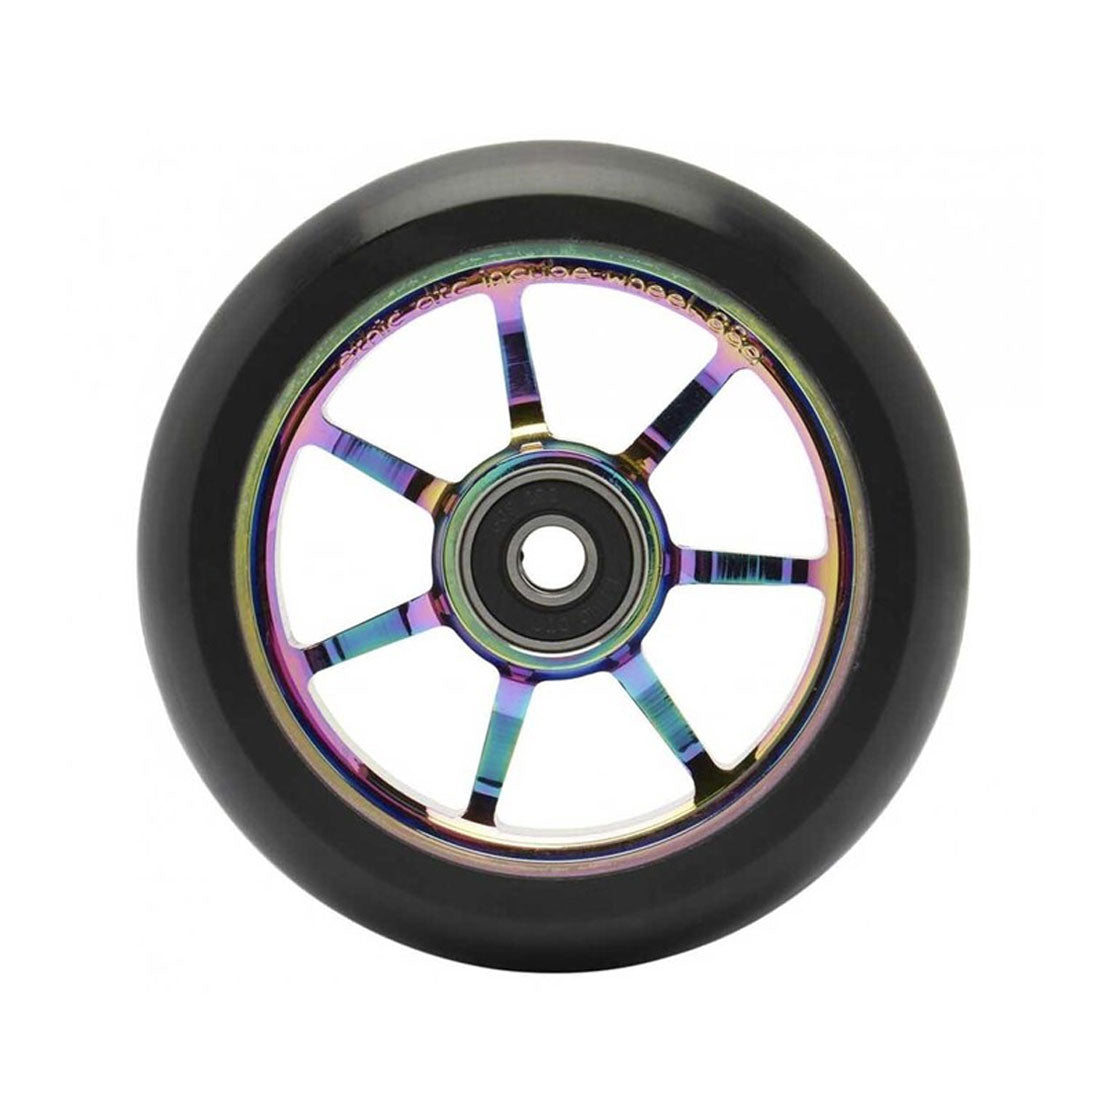 Ethic Incube 110mm Wheel - Neochrome Scooter Wheels